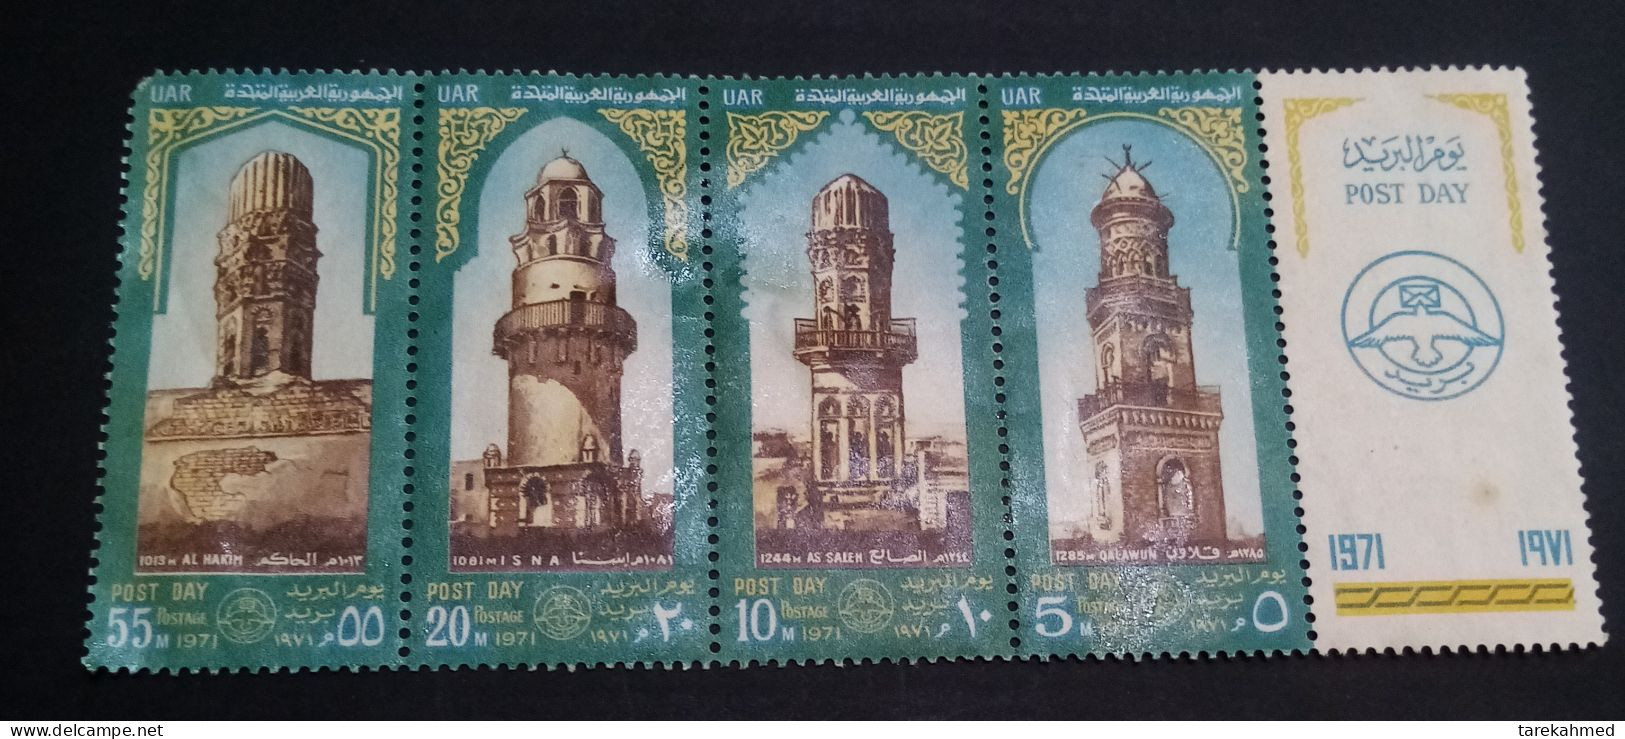 Egypt 1971 , Complete Mint SET Of The Post Day , Old Mosques Minarets , Sc 912-15 With Label . MH - Ongebruikt